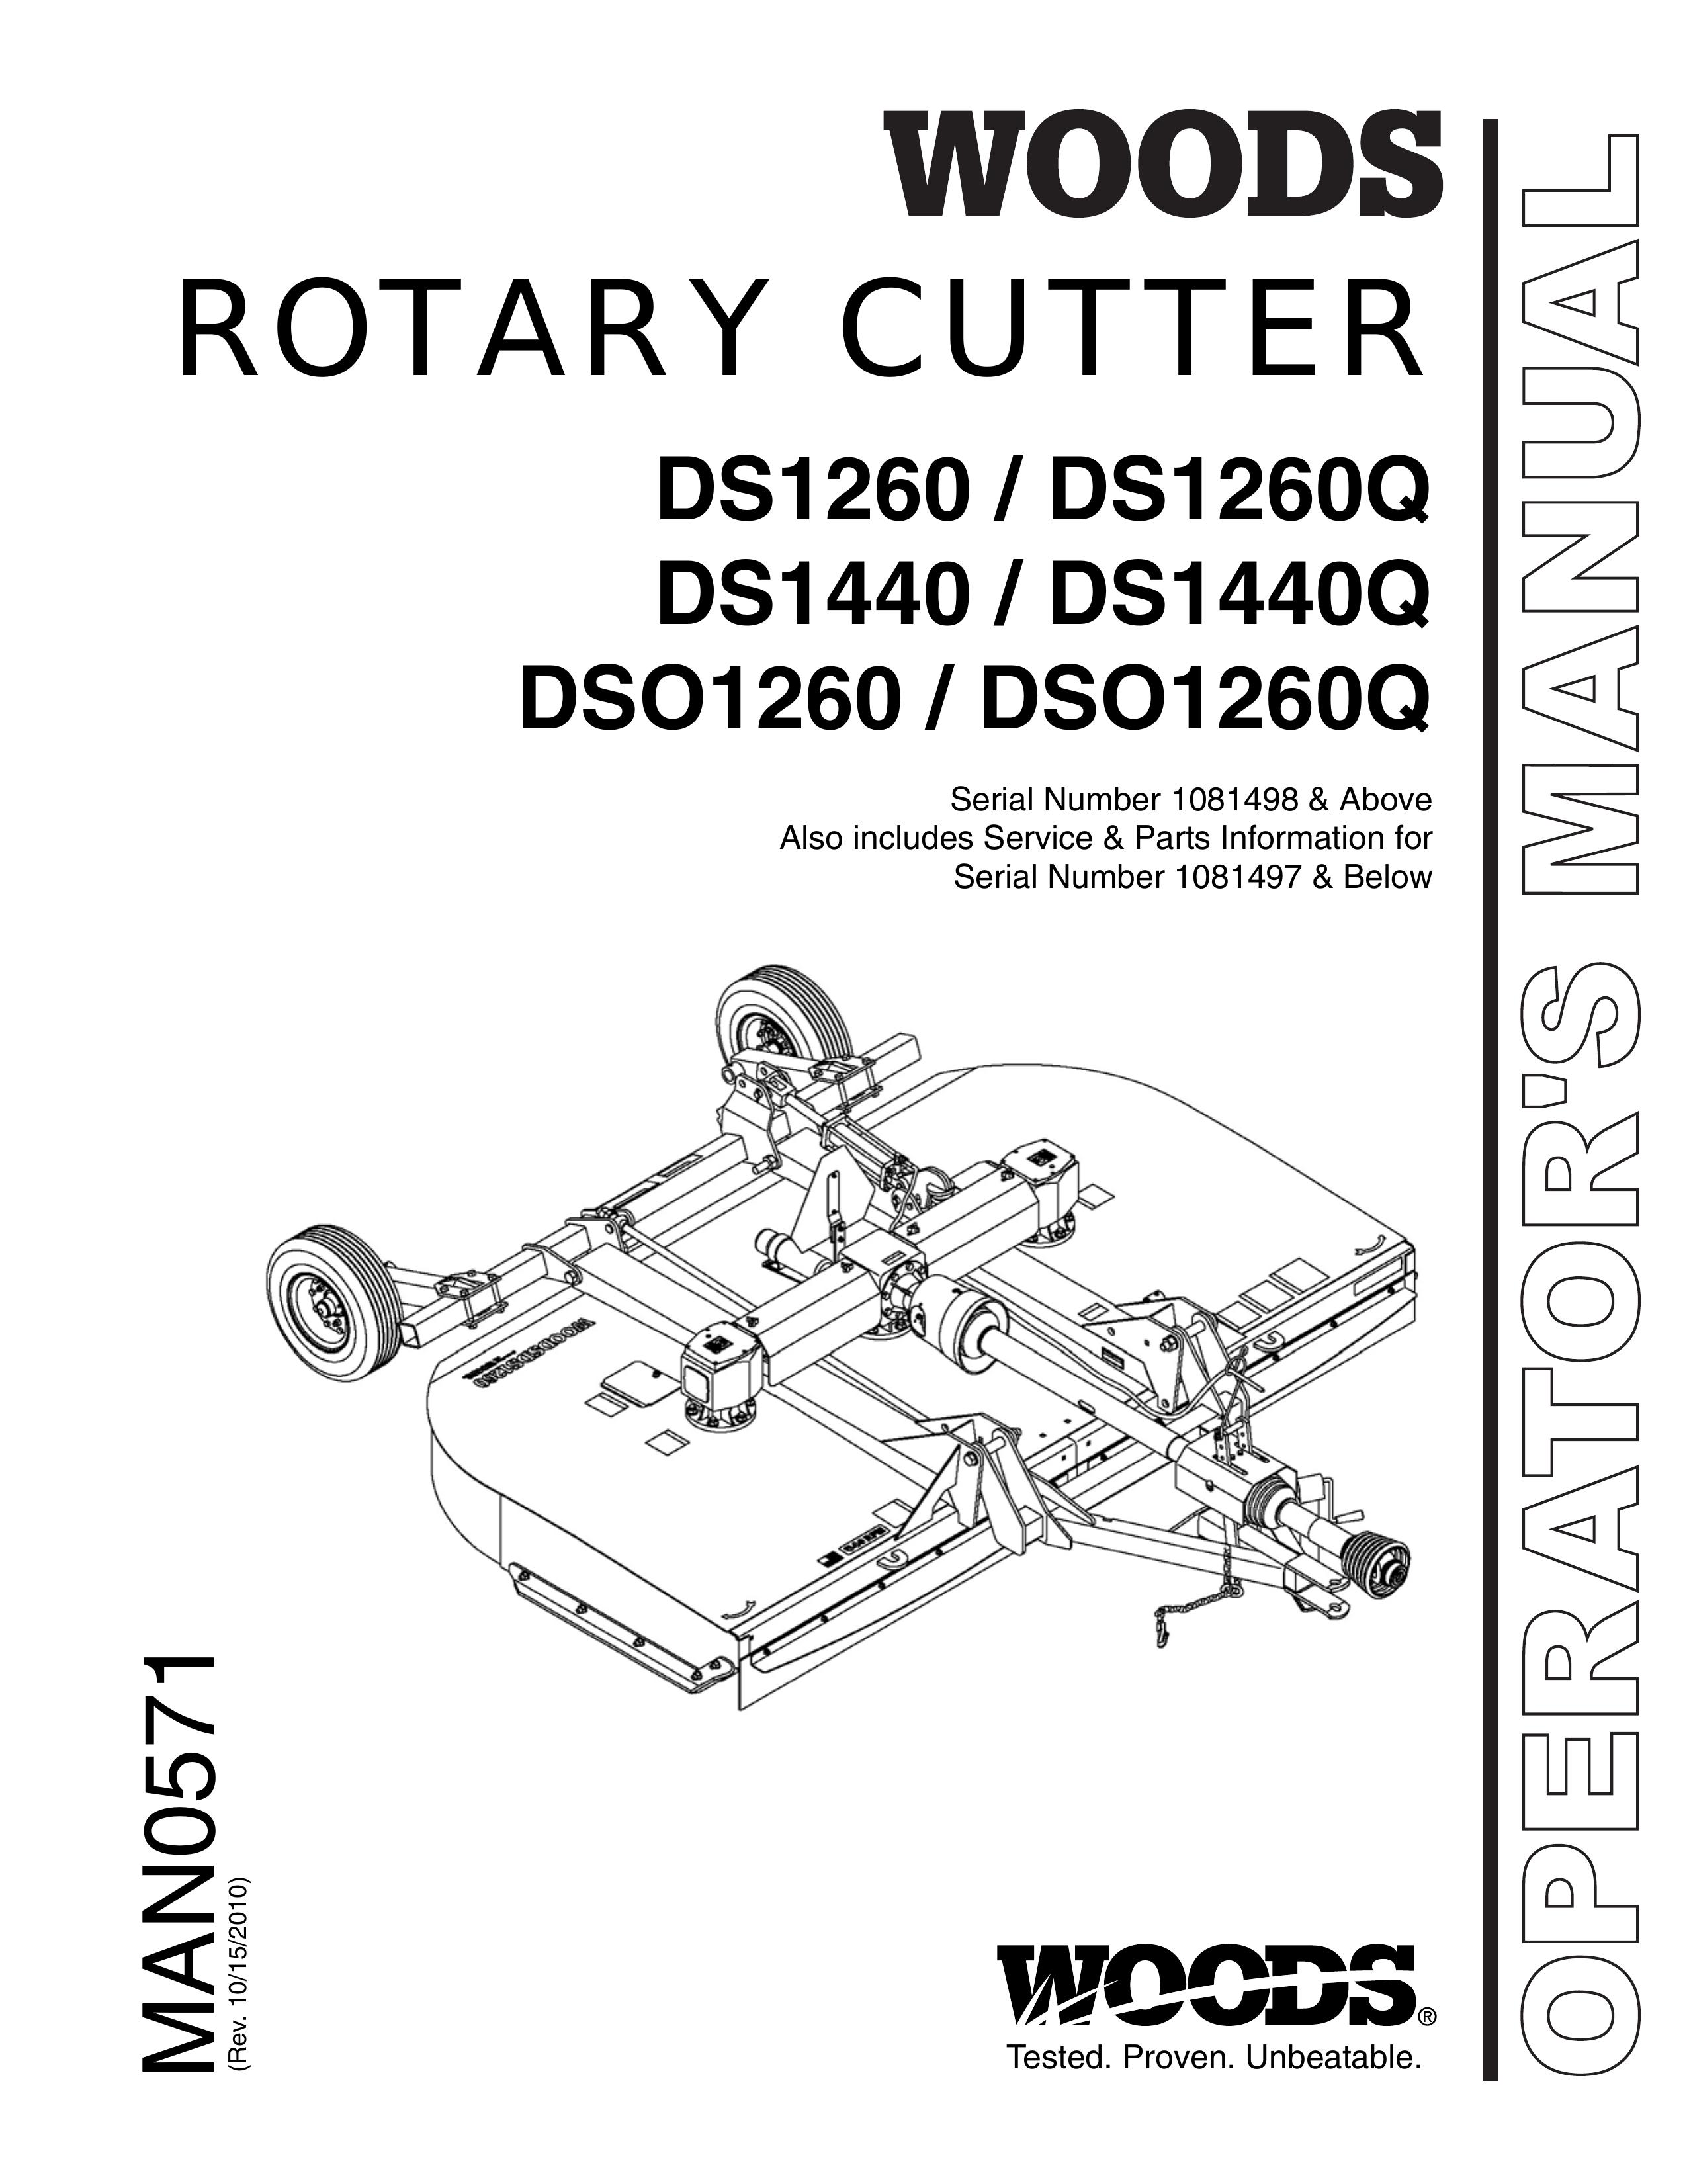 Woods Equipment DSO1260 Brush Cutter User Manual